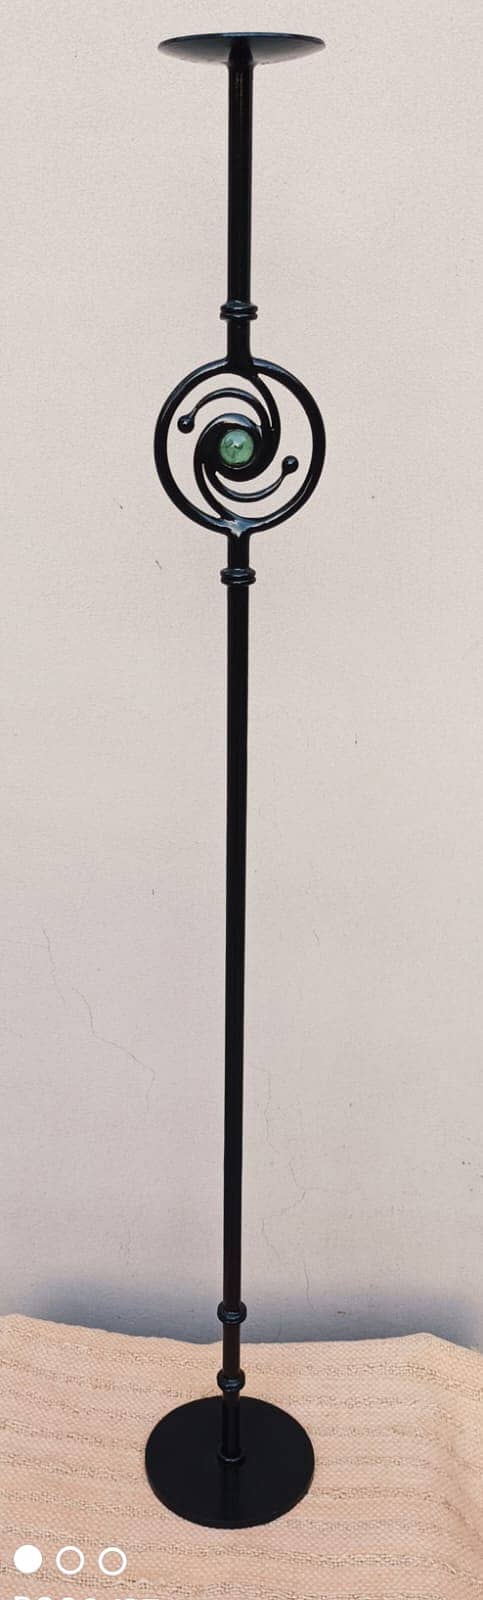 Steel / Wrought Iron Candle Stands on sale 2